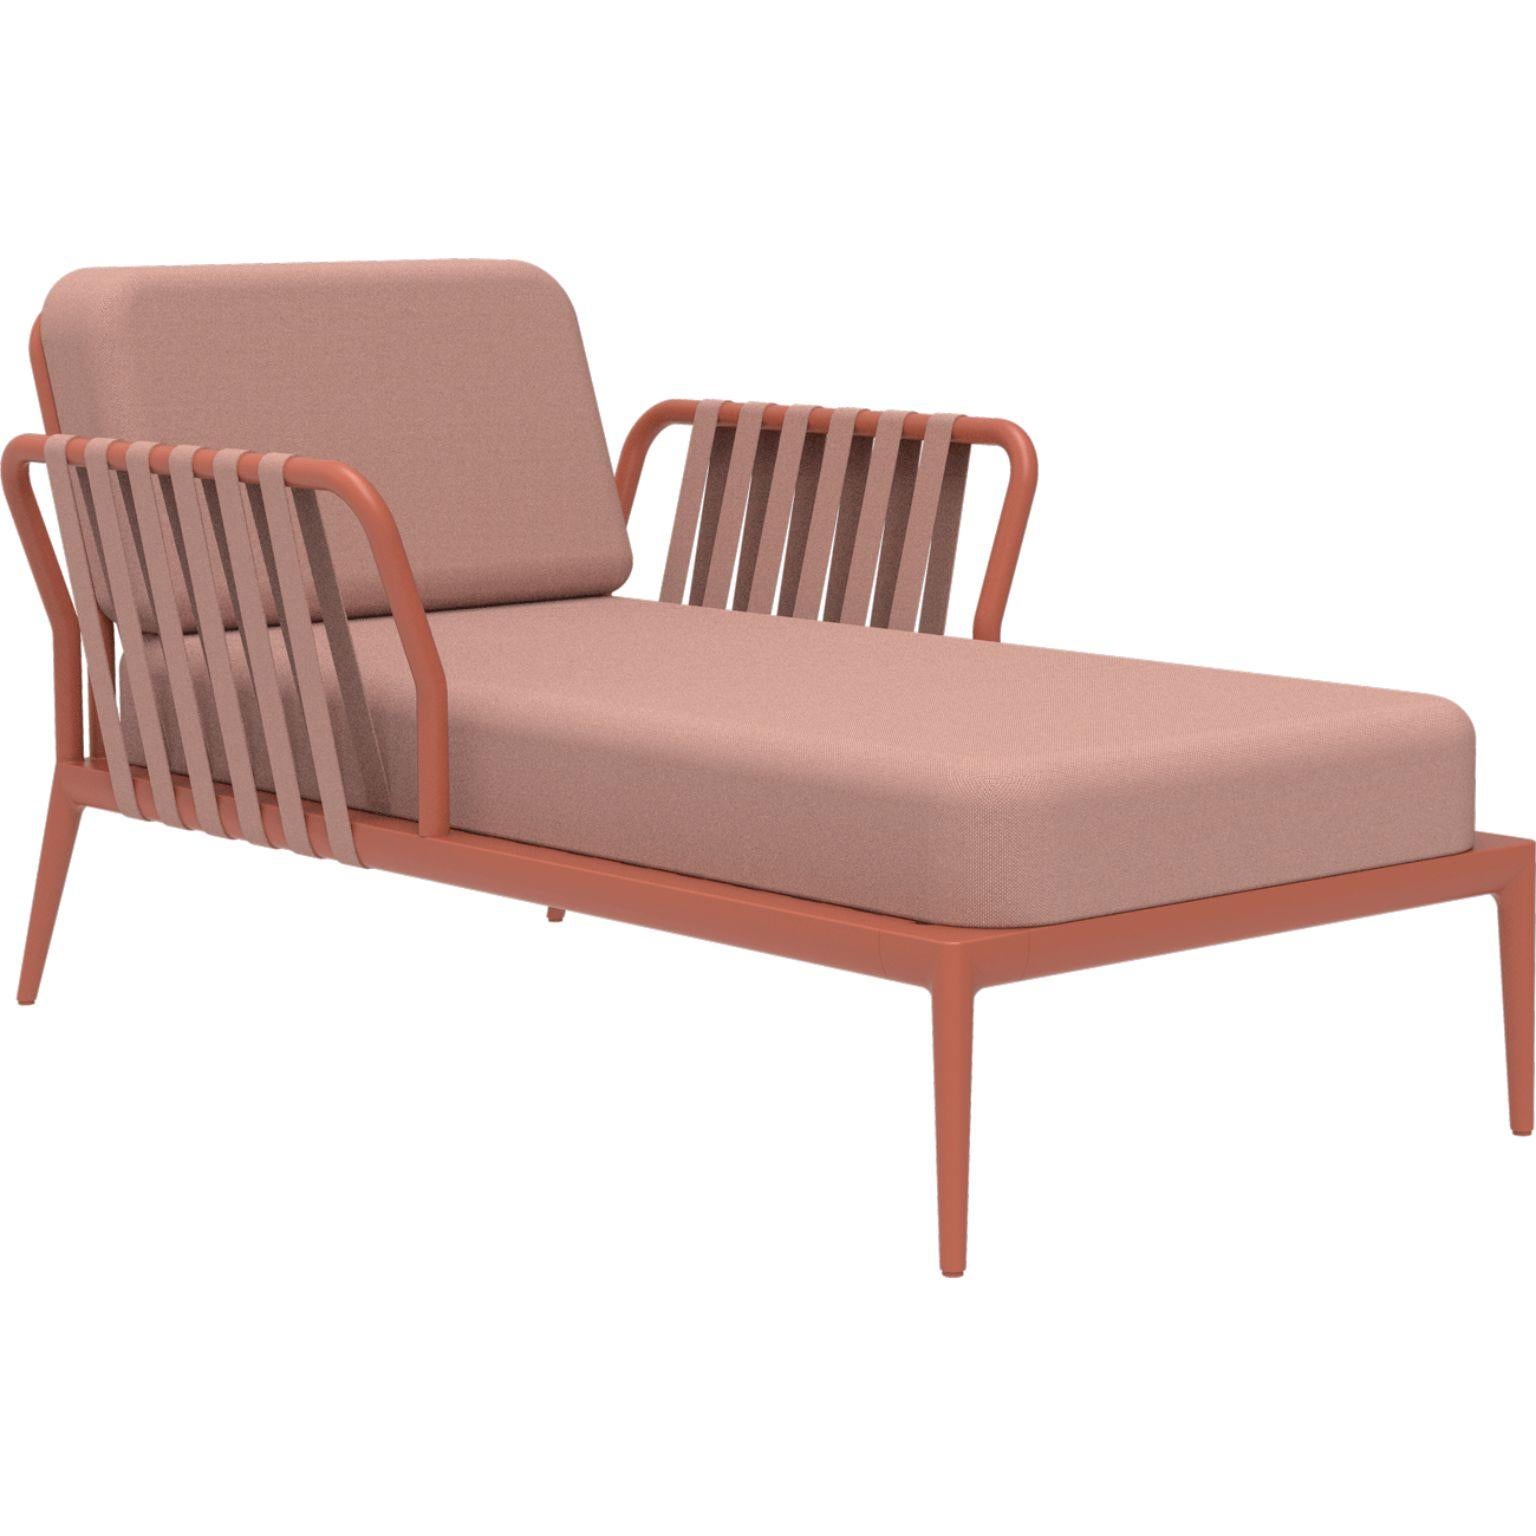 Ribbons Salmon Divan by MOWEE
Dimensions: D91 x W155 x H81 cm (seat height 42cm)
Material: Aluminum and upholstery.
Weight: 30 kg.
Also available in different colors and finishes.

An unmistakable collection for its beauty and robustness. A